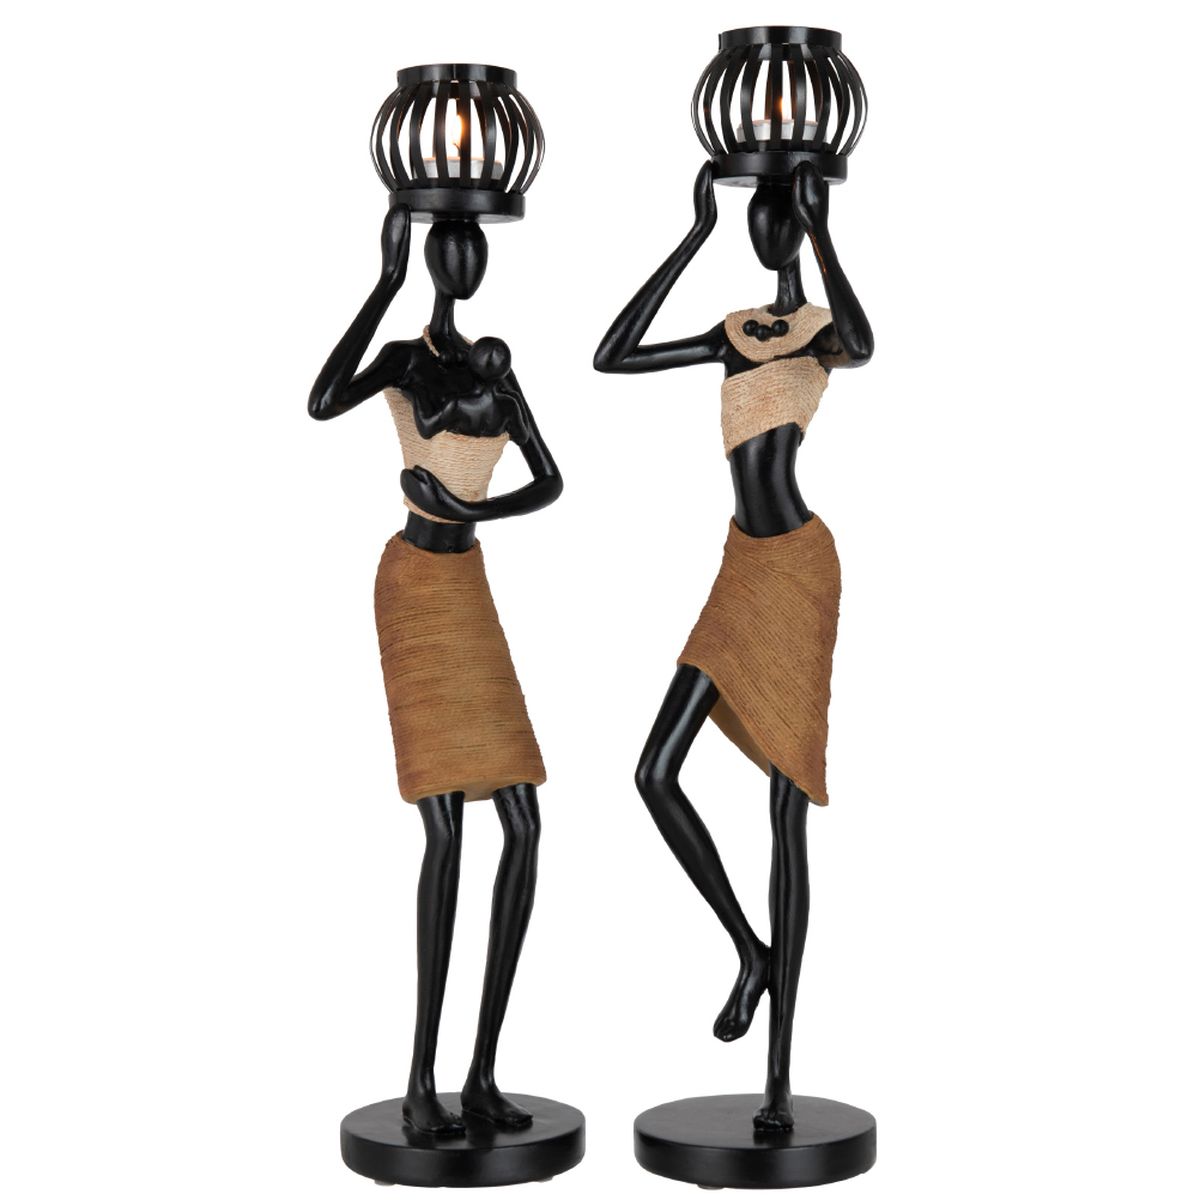 Set of 2 African figurine candle holders